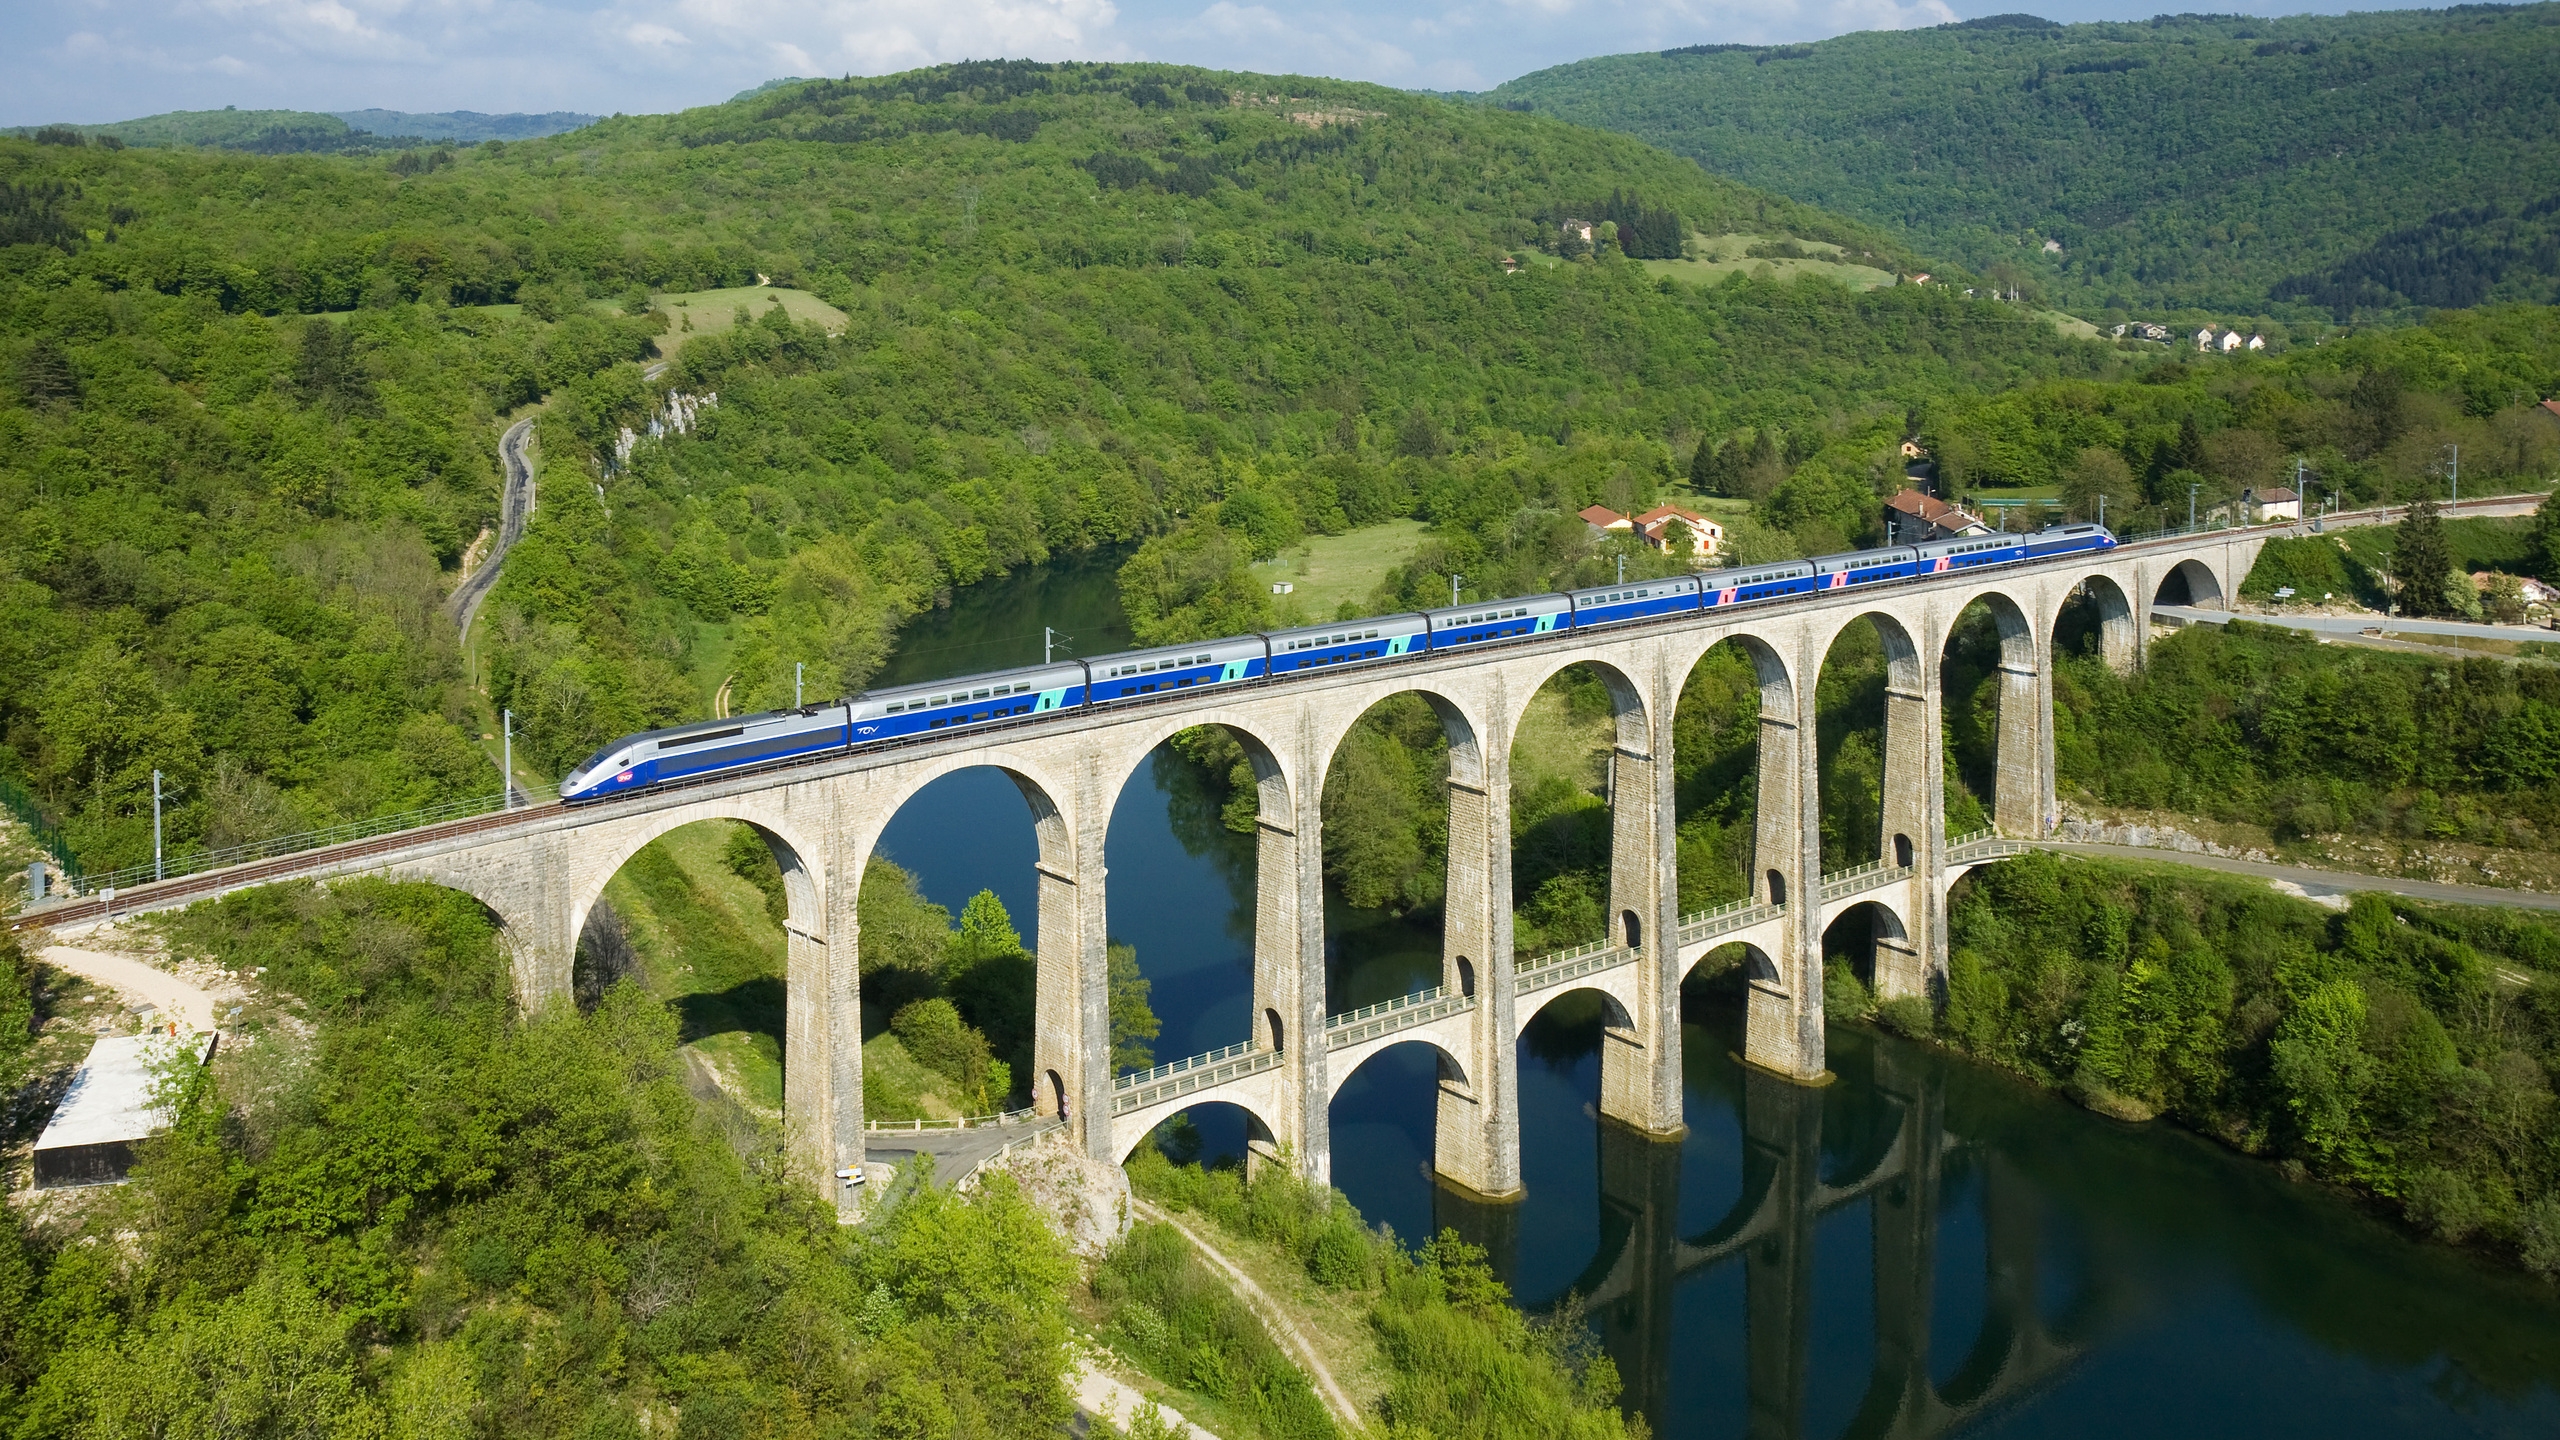 Cize Bolozon Viaduct for 2560x1440 HDTV resolution